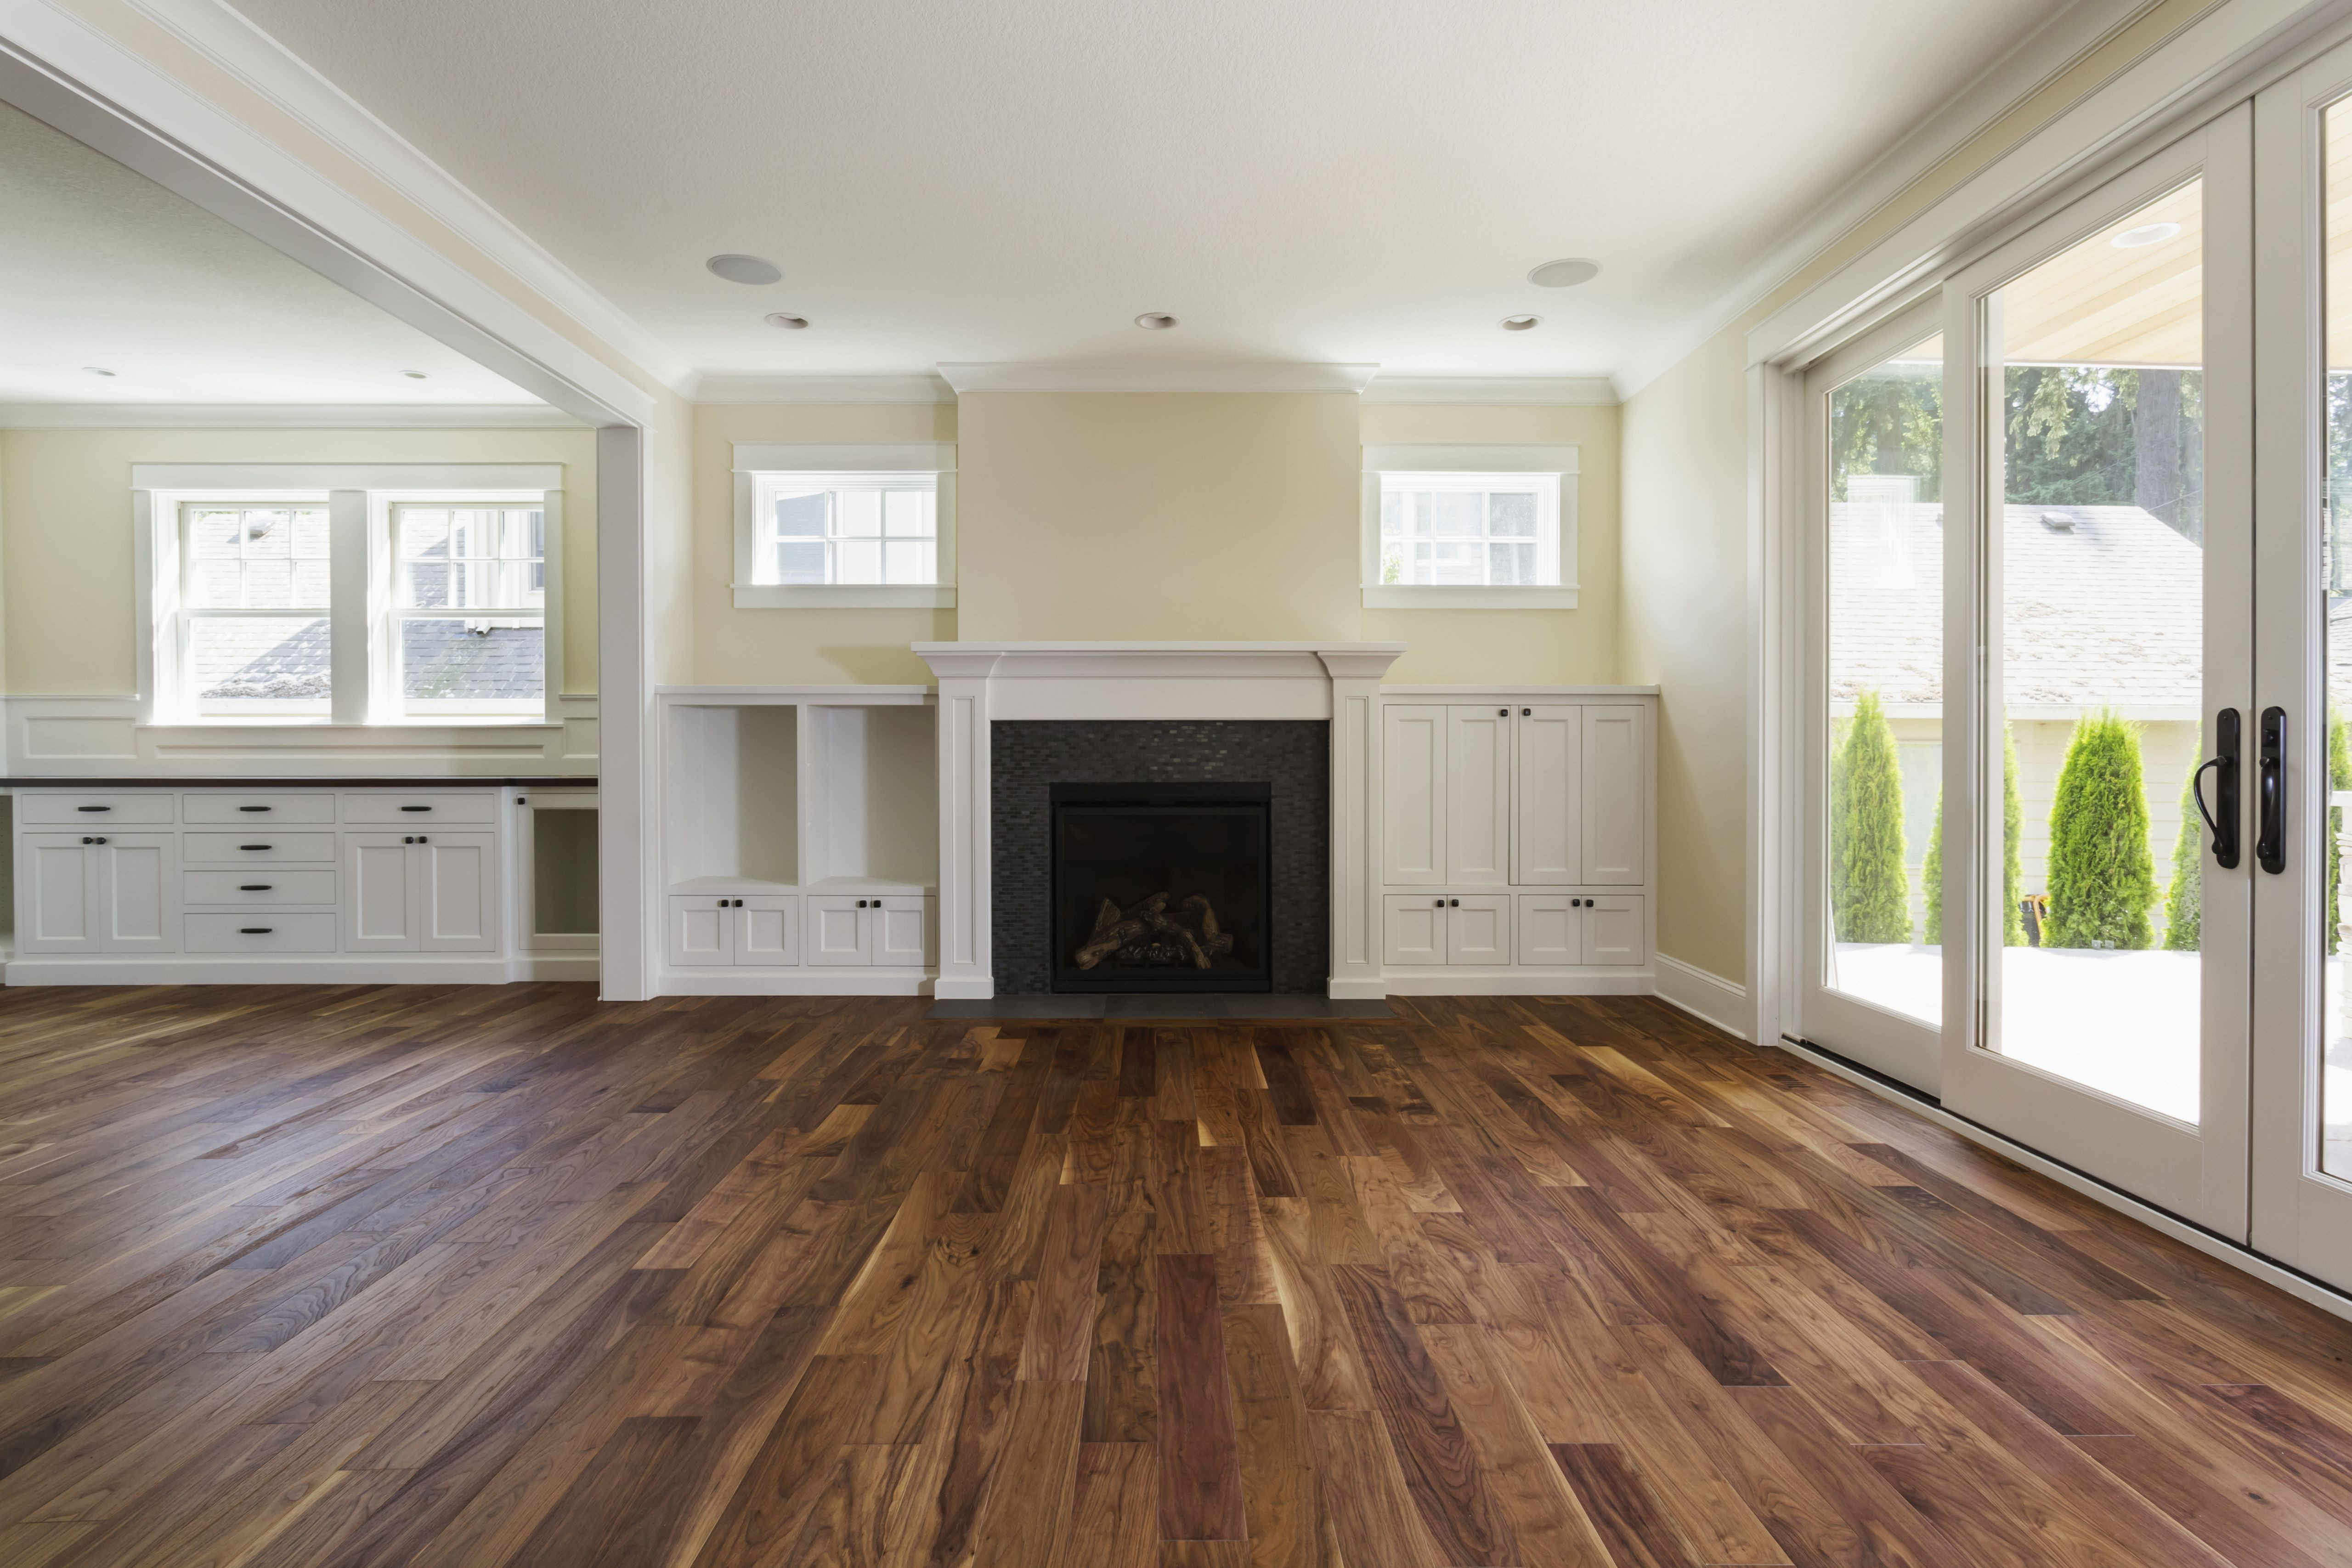 18 Stylish How to Install Hardwood Floor Around Fireplace 2024 free download how to install hardwood floor around fireplace of the pros and cons of prefinished hardwood flooring with fireplace and built in shelves in living room 482143011 57bef8e33df78cc16e035397